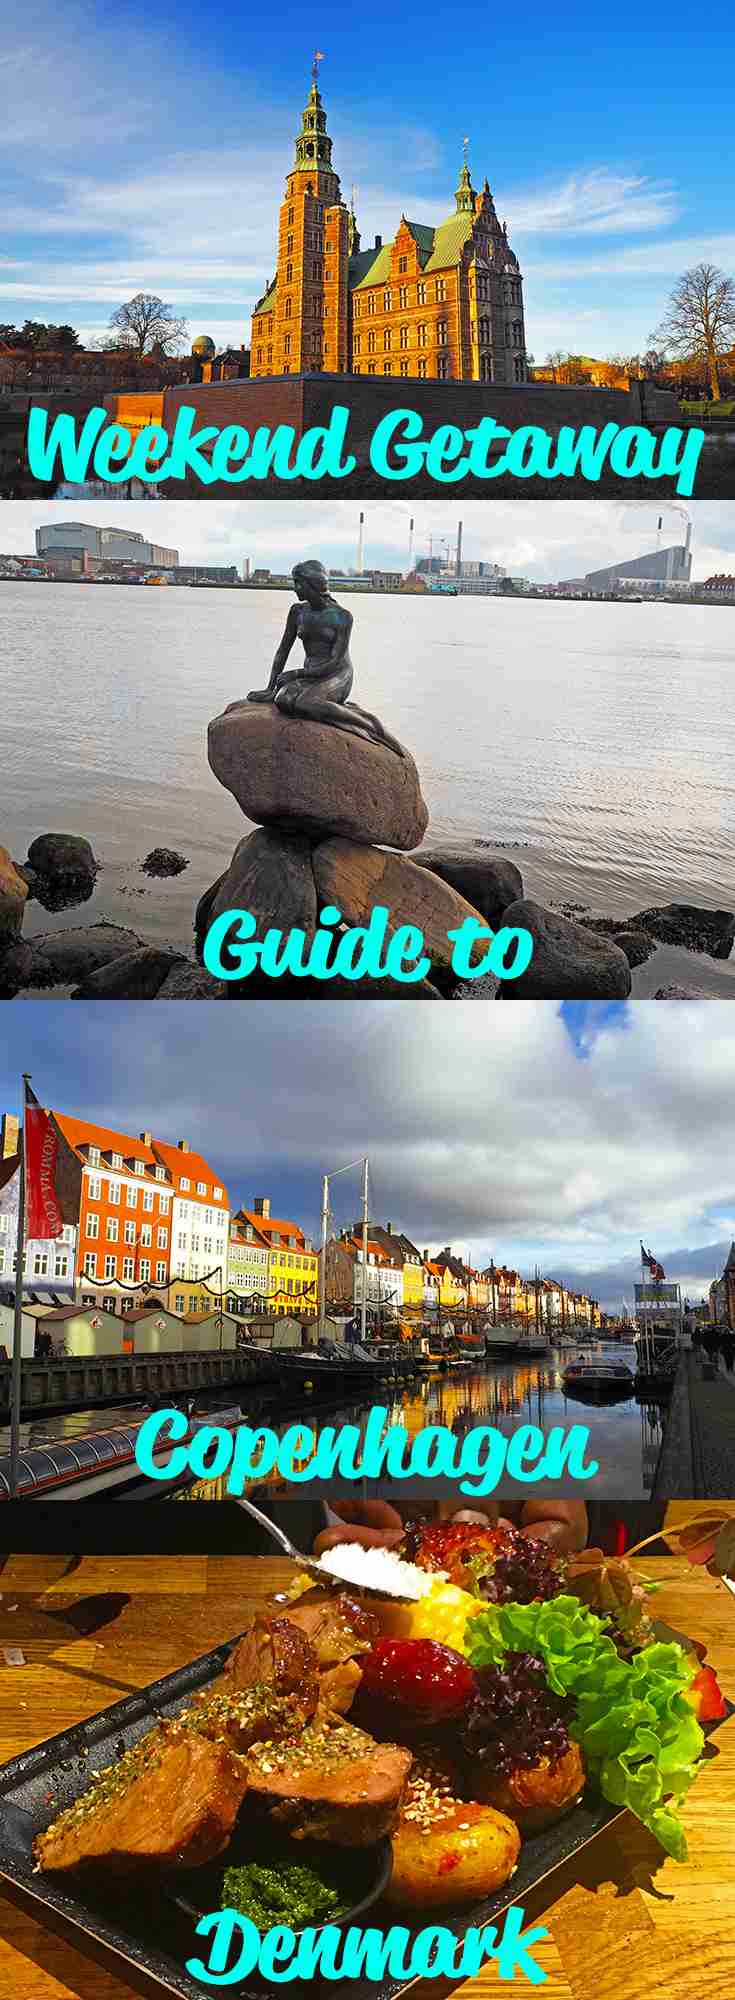 A long weekend getaway guide to Copenhagen – WhodoIdo: Explore the hip and cool city of Copenhagen. Only a short flight from Europe, making Copenhagen perfect for a long weekend break. Explore the city by bike, visit the castles, ride the thrilling rides in Tivoli Gardens and sample the divine food Copenhagen has to offer.